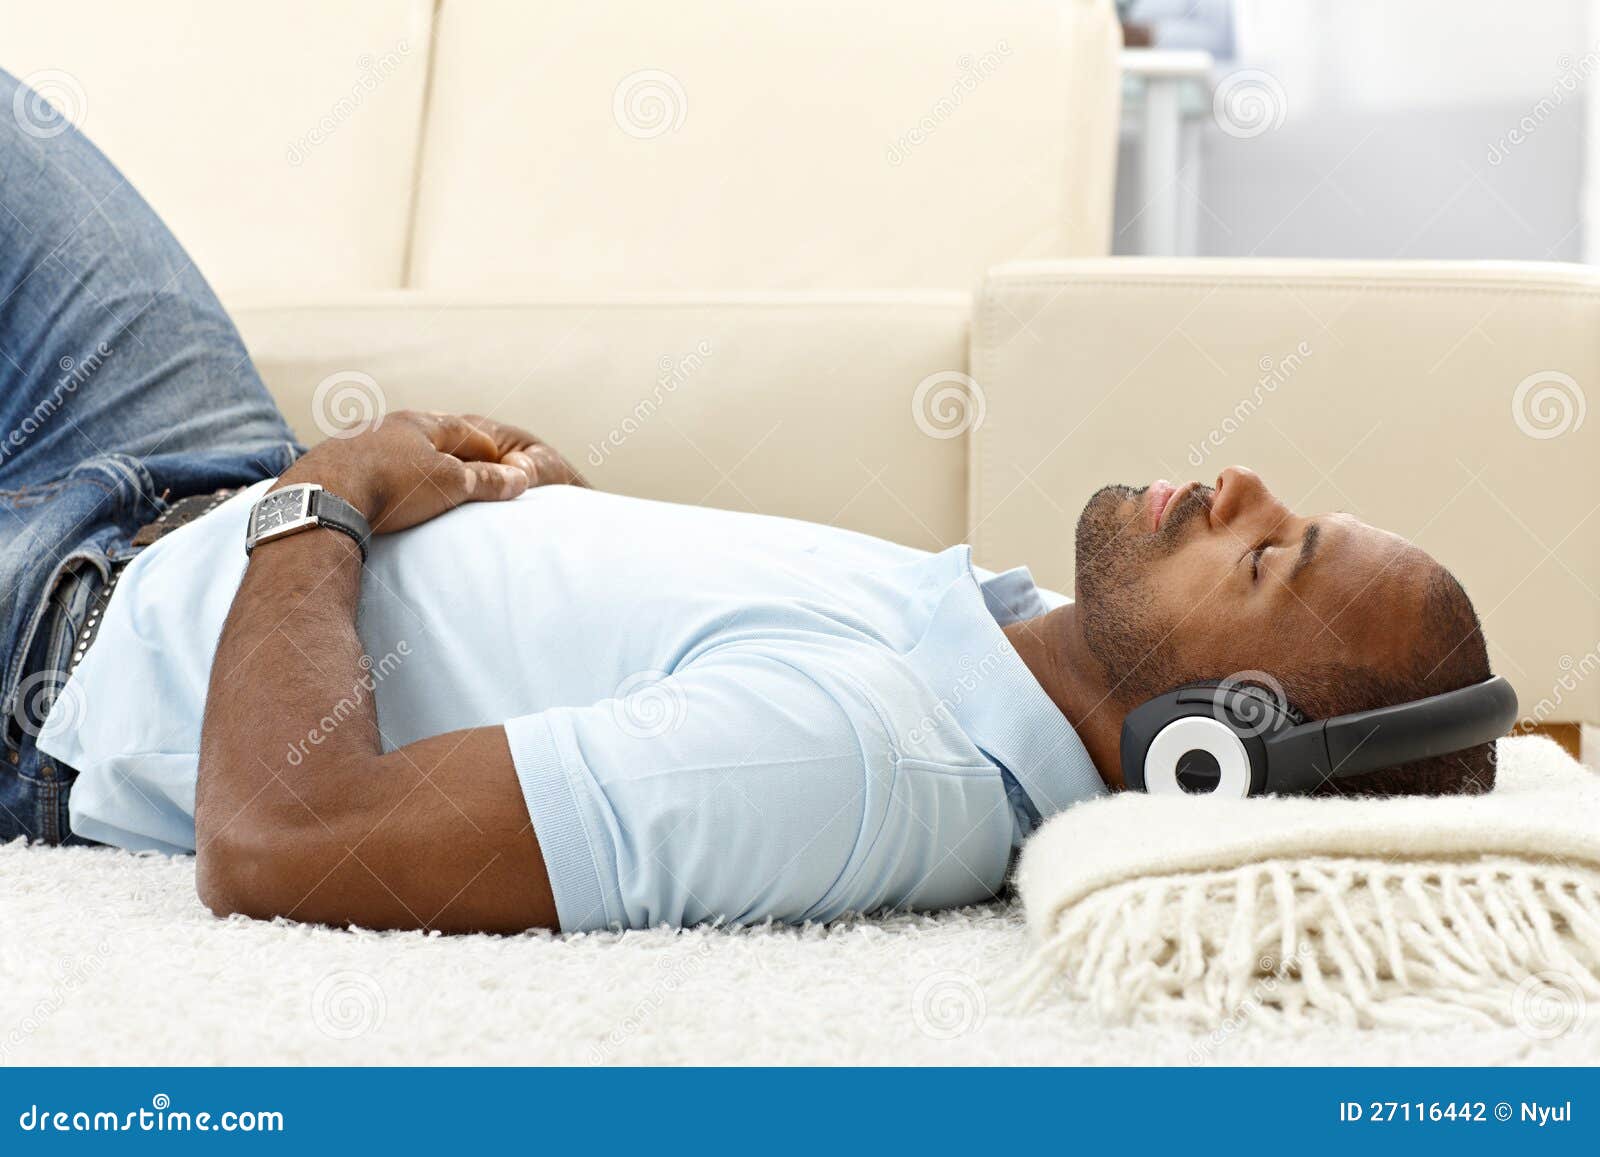 relaxing with music on headphones